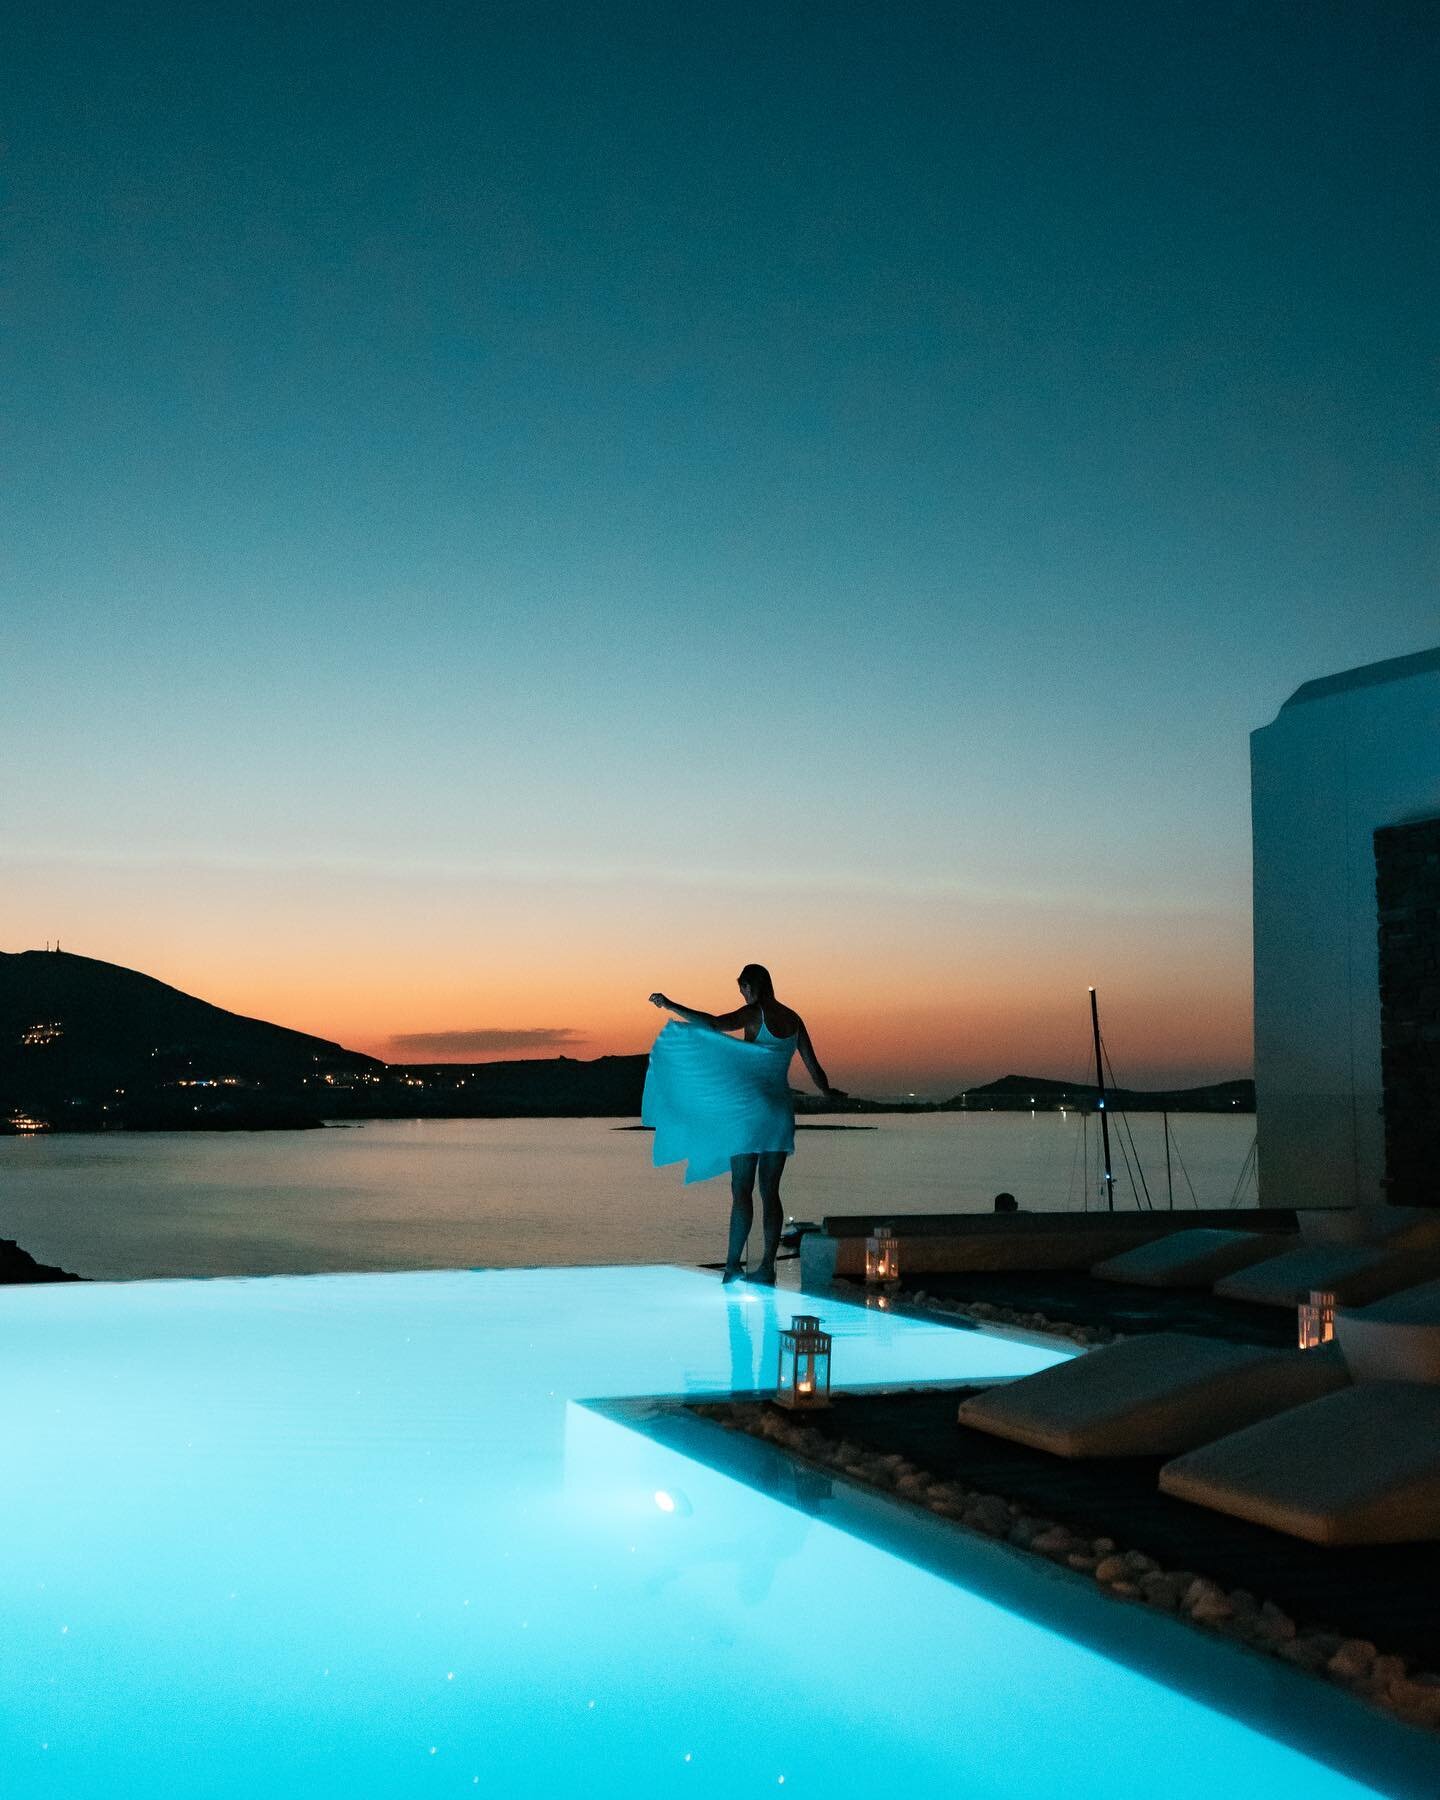 They say a picture is worth 1000 words,

✨✨

But even with 1000 words I still wouldn&rsquo;t know how to describe this pool with built in stars in Paros, Greece.

✨✨

Too bad we&rsquo;re crappy photographers, you really should see this place.

✨✨

@s